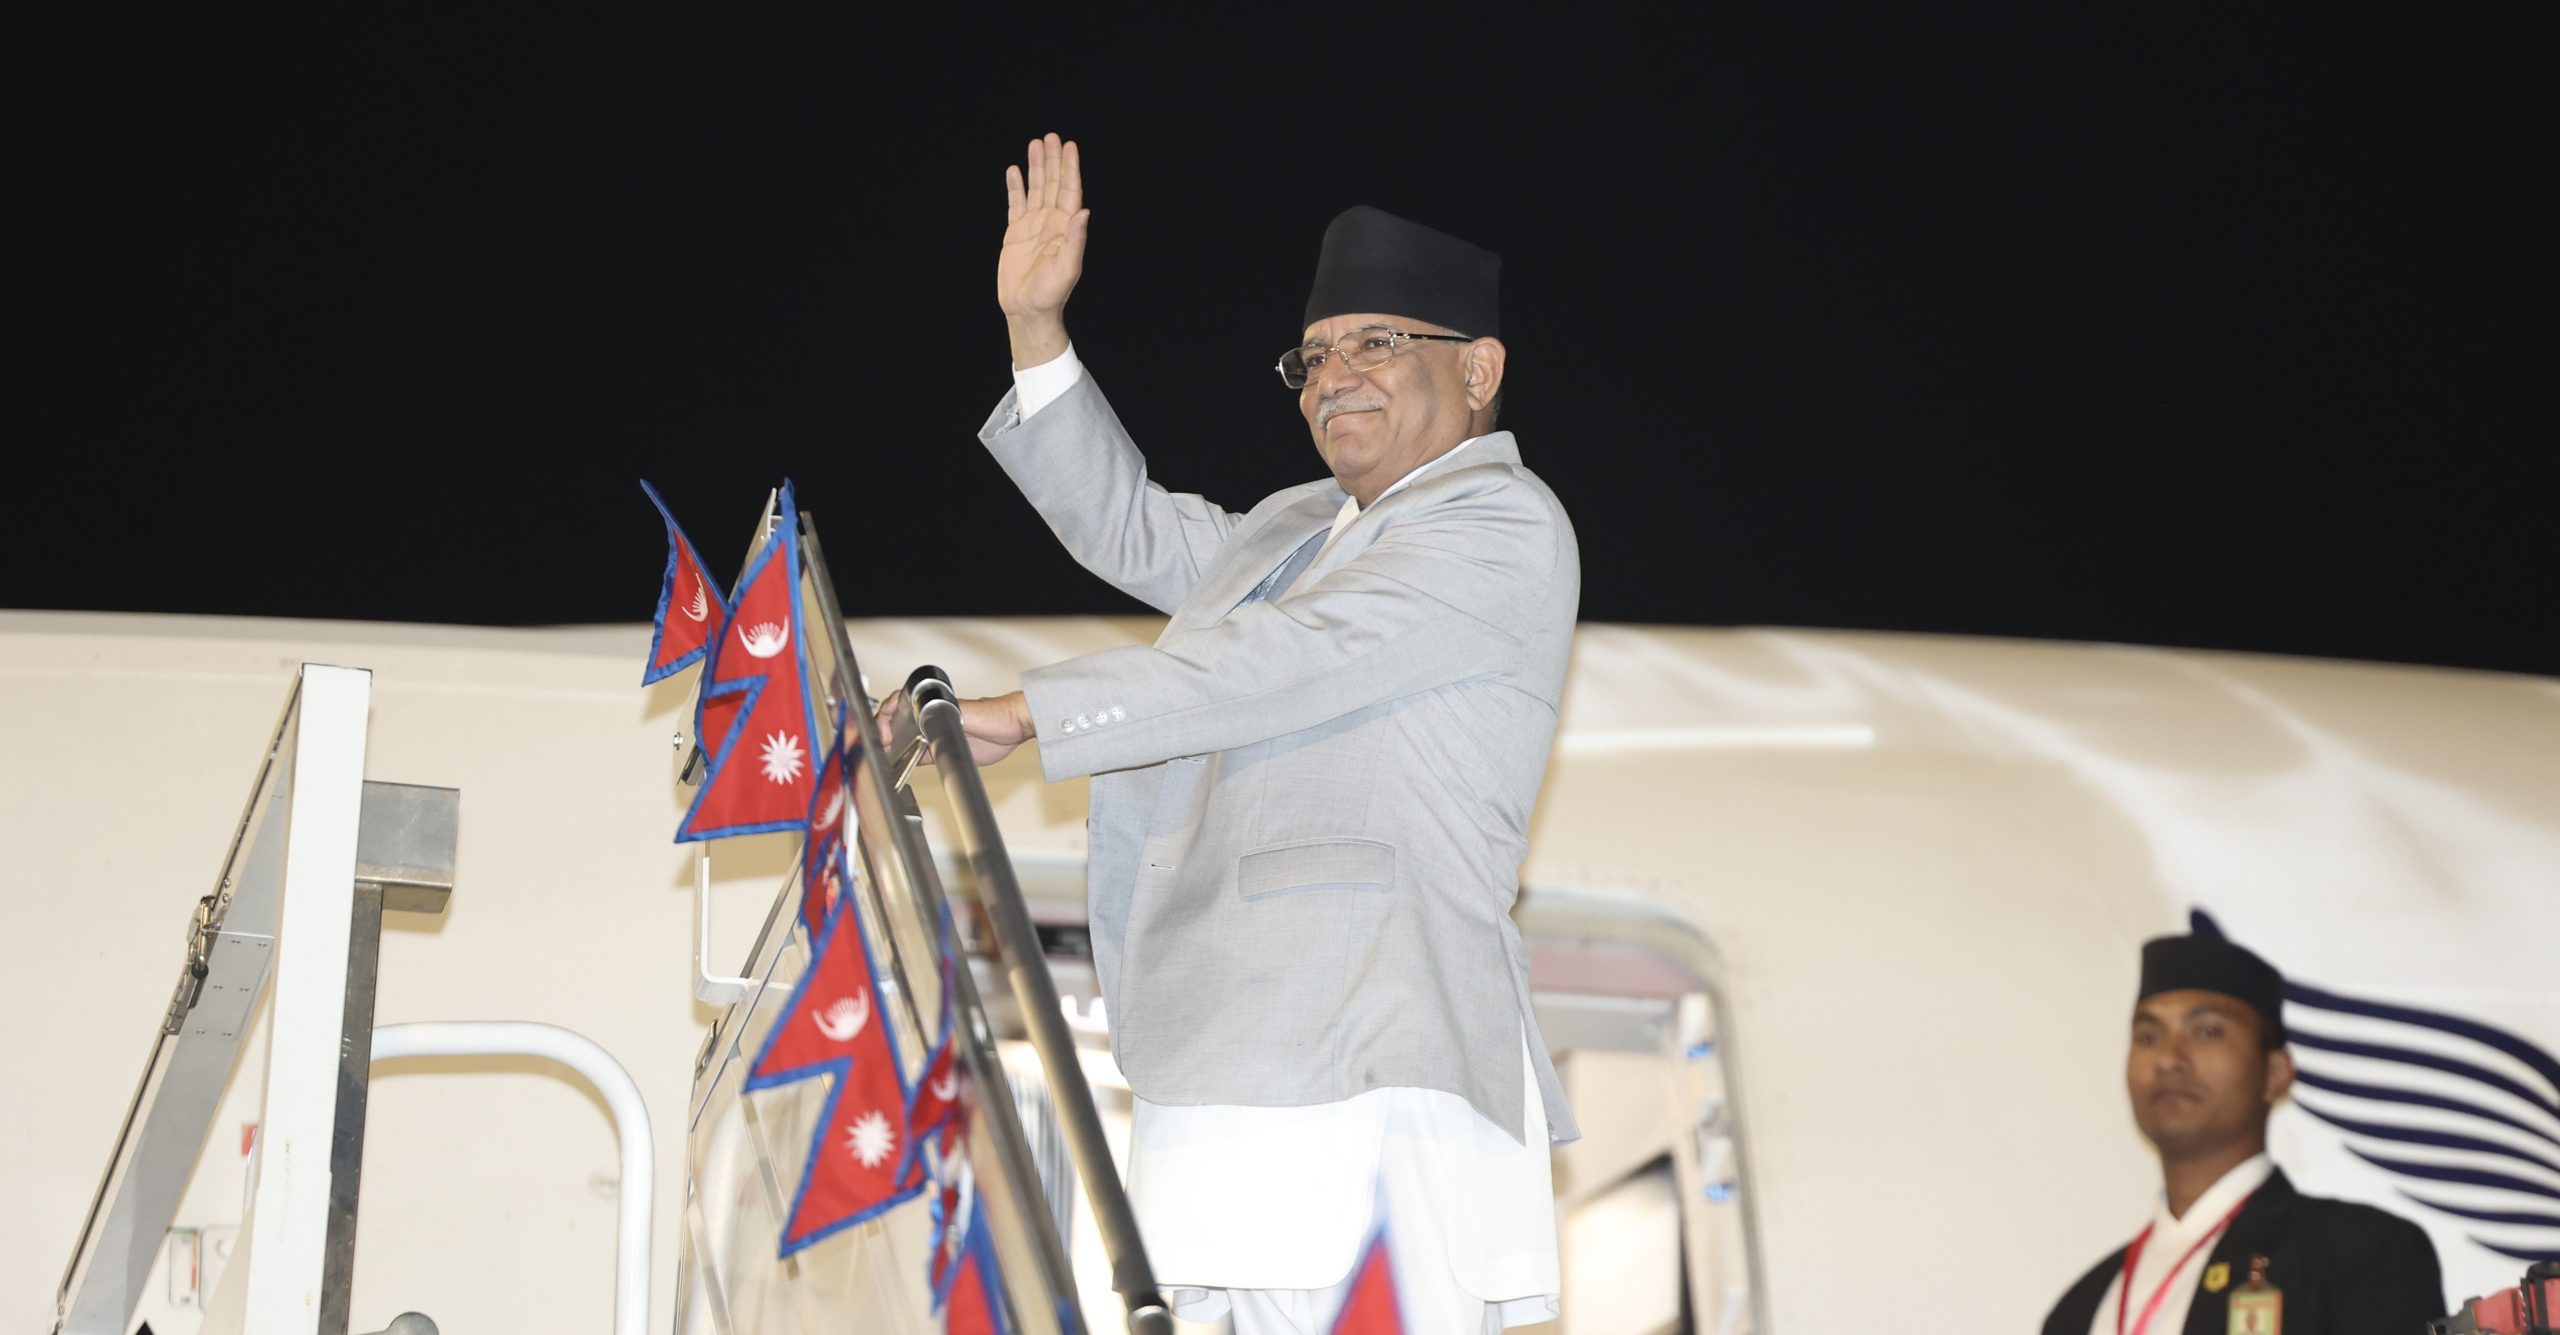 Passengers with tickets on Nepal Airlines Dubai flight with PM couldn’t depart